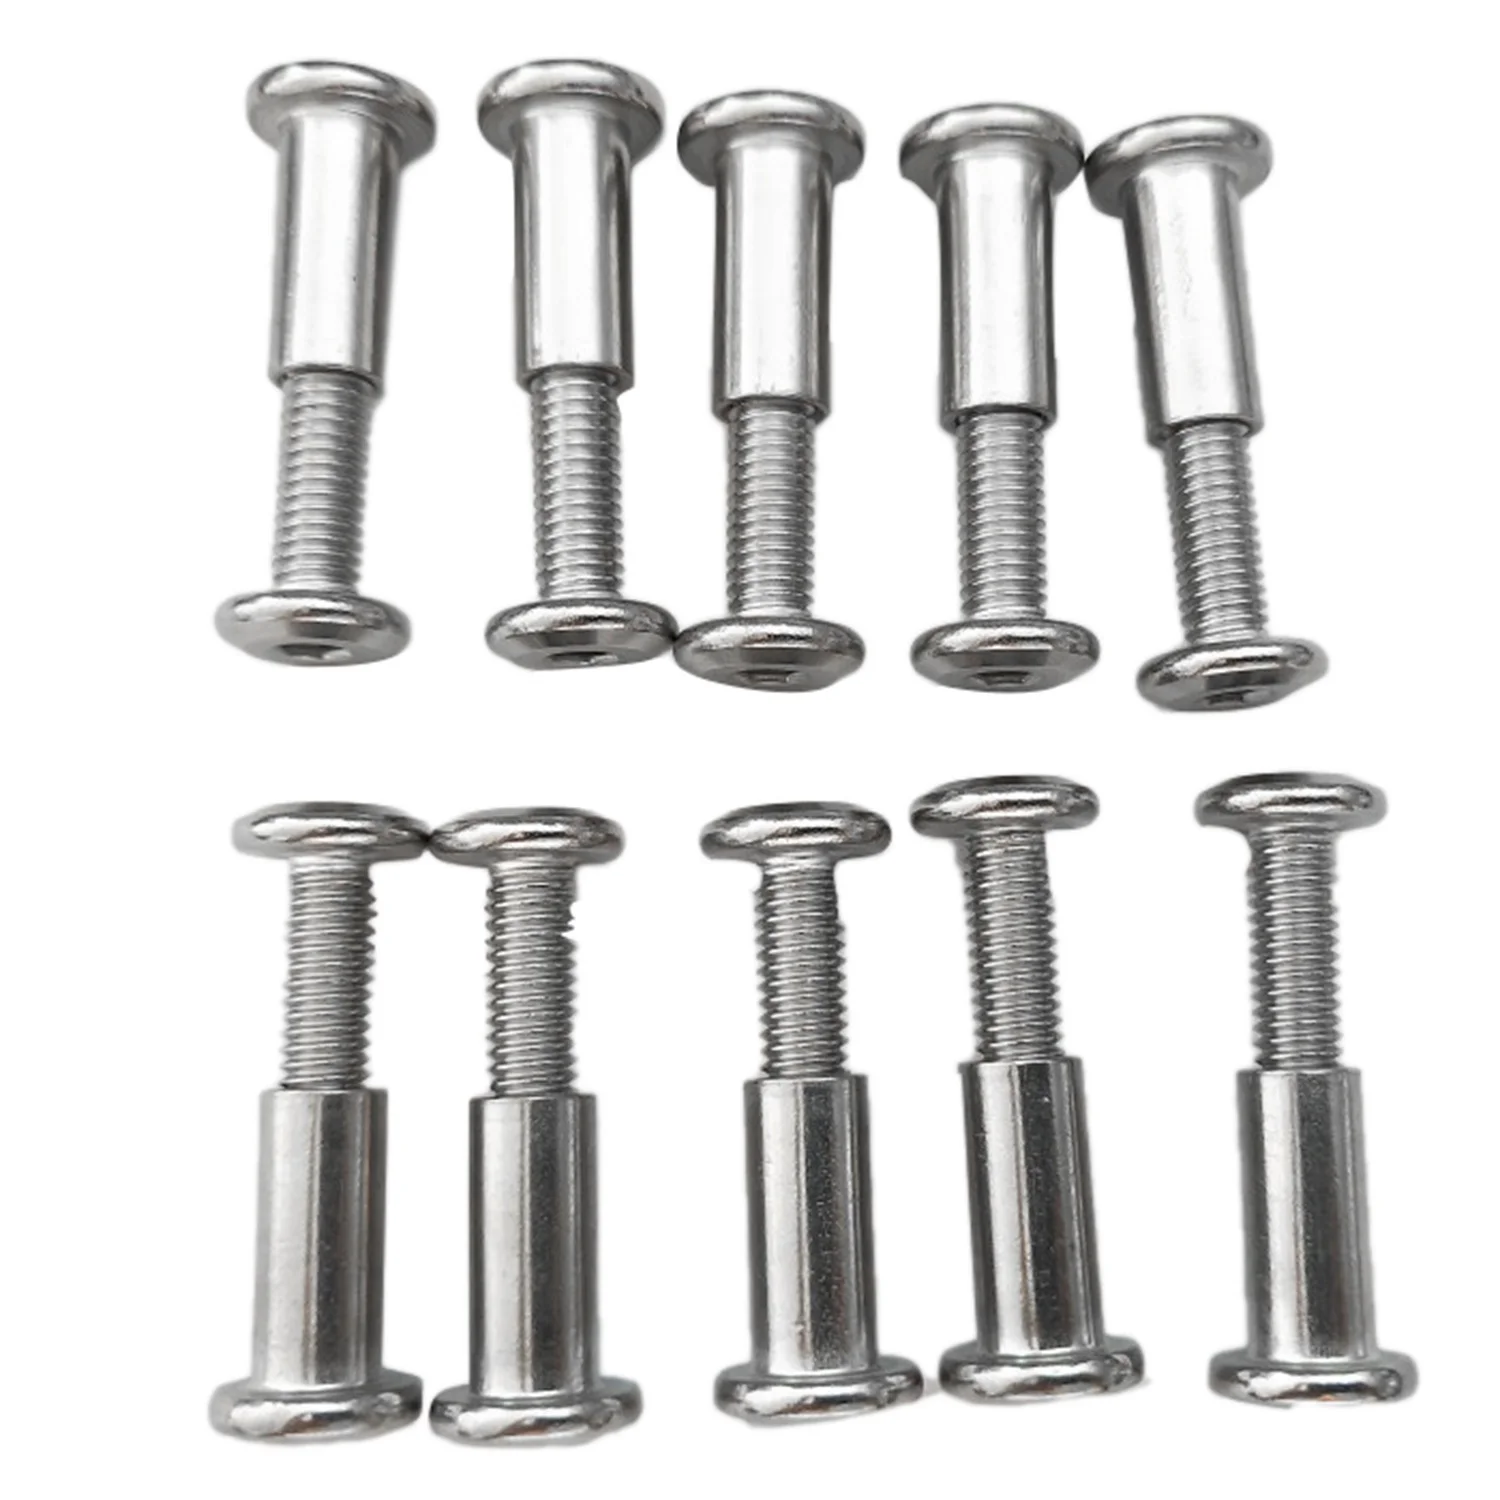 

20 Pcs Screw Post Fit for 5/16Inch(8mm) Hole Dia Male M6X20mm Female M6X18mm Belt Buckle Binding Bolts Leather Fastener